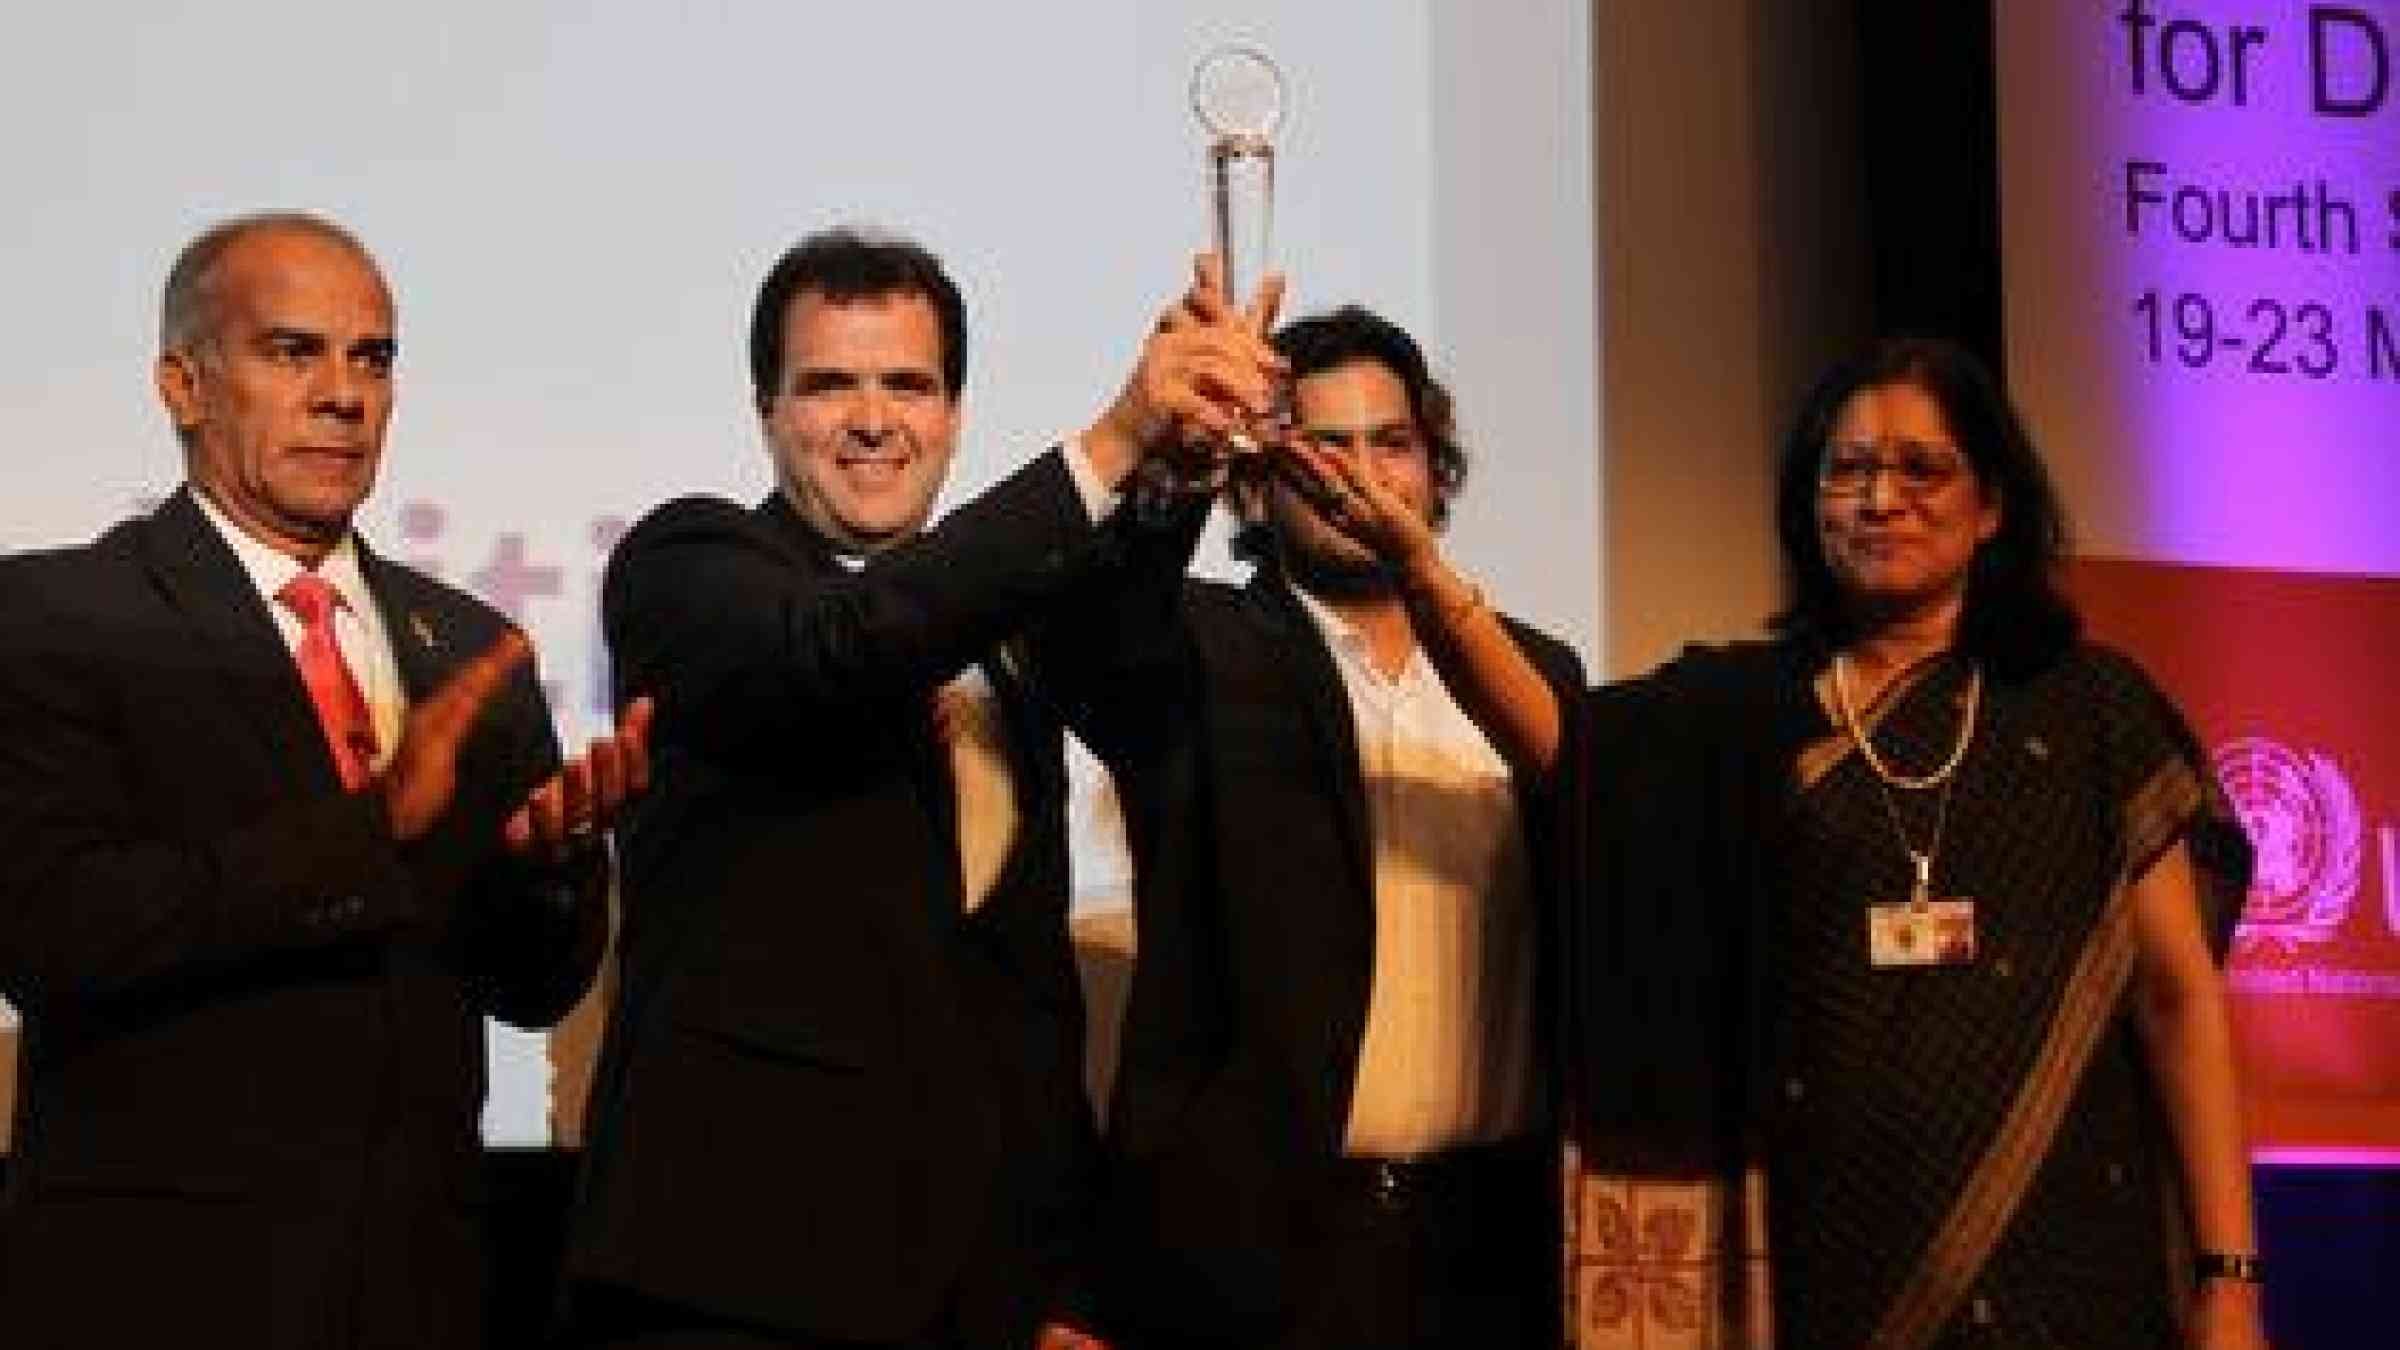 Representatives from Belo Horizonte and NAARI pose for a photo following the announcement of the winners of the 2013 Award.